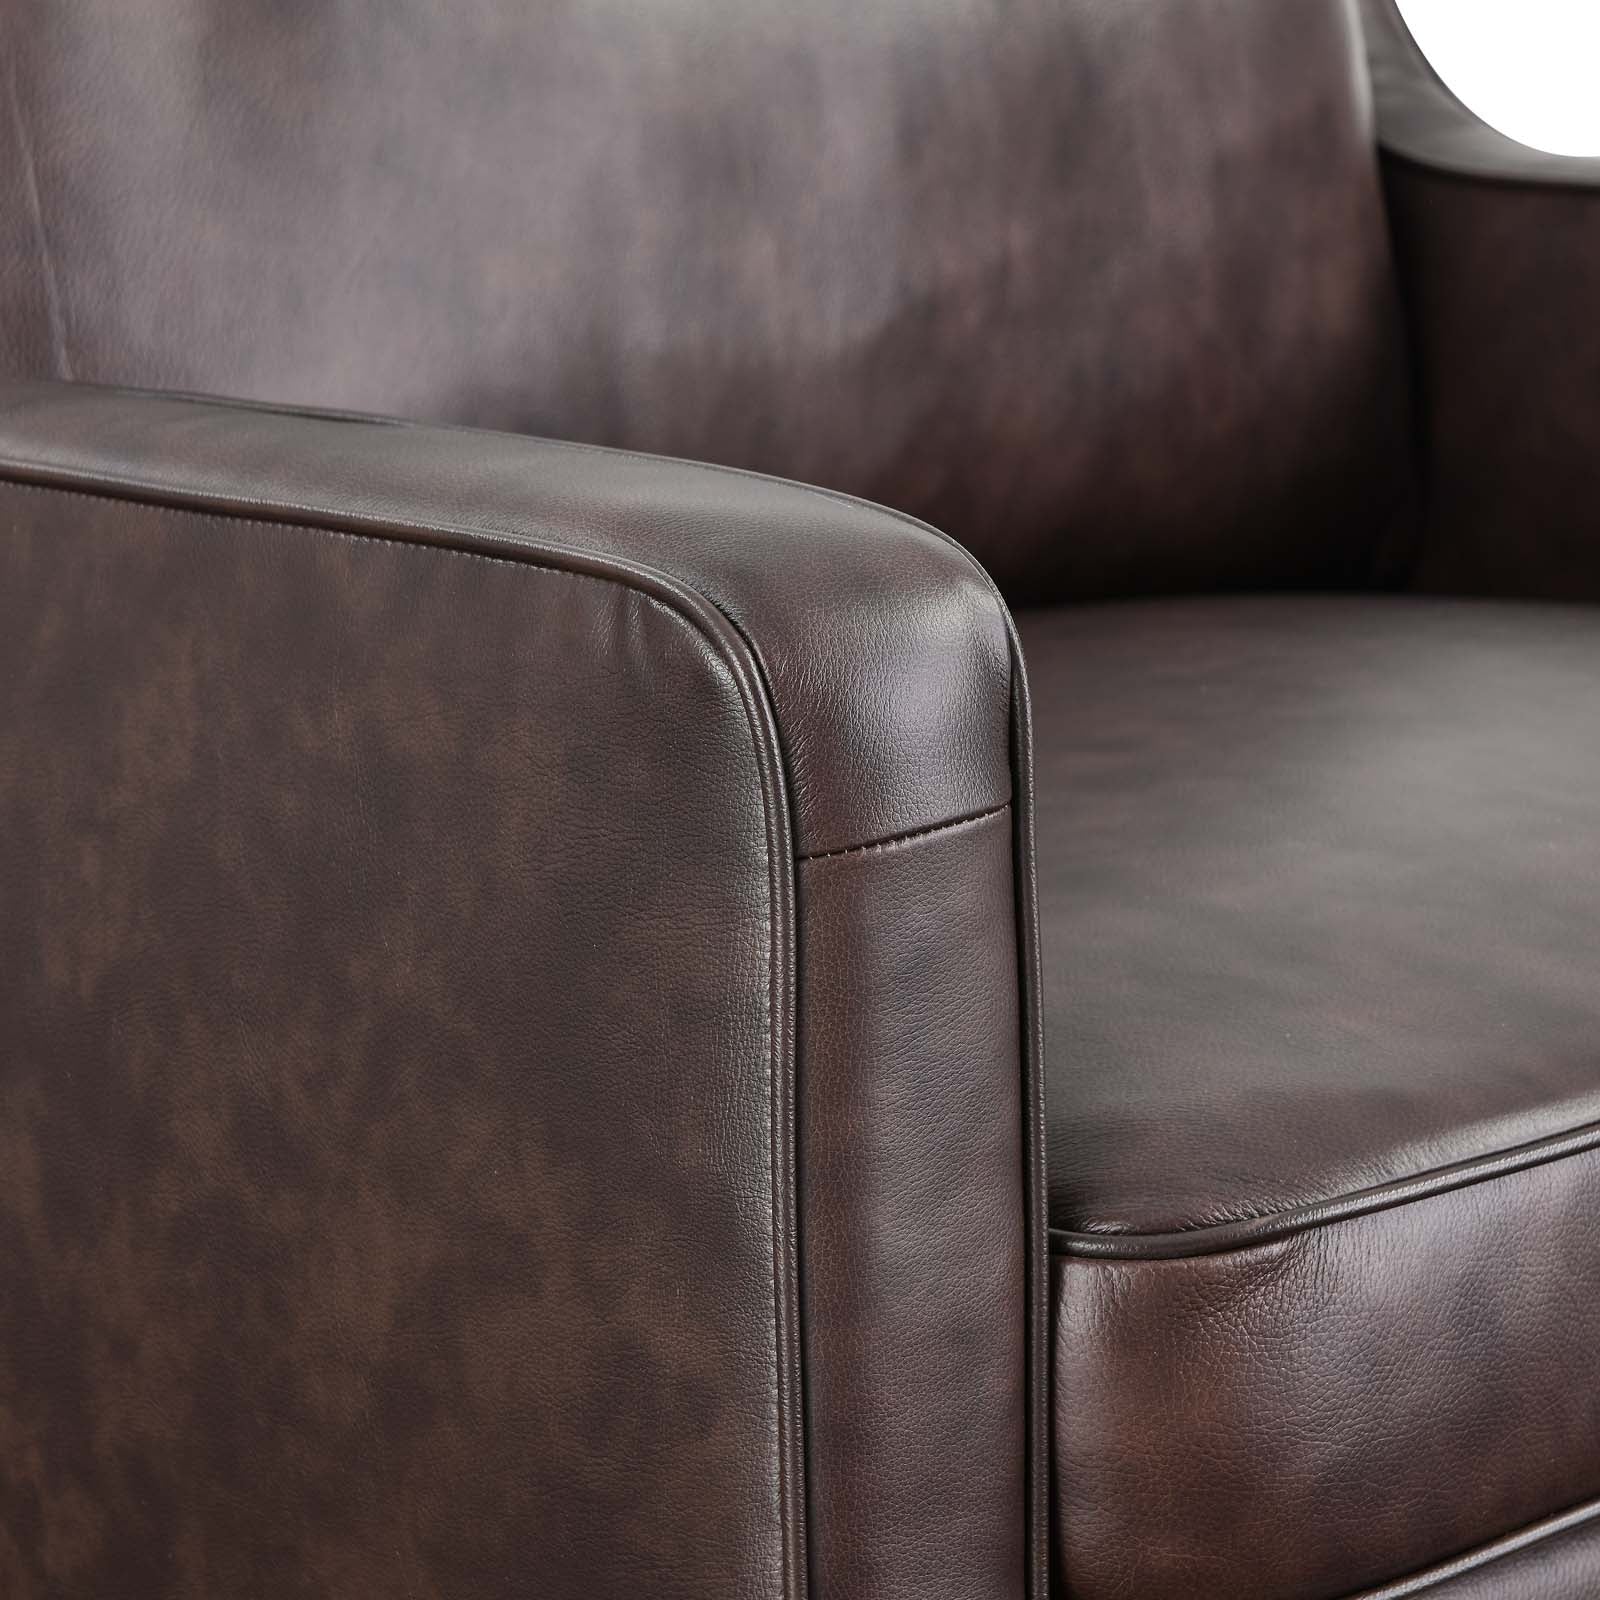 Impart Genuine Leather Armchair - East Shore Modern Home Furnishings